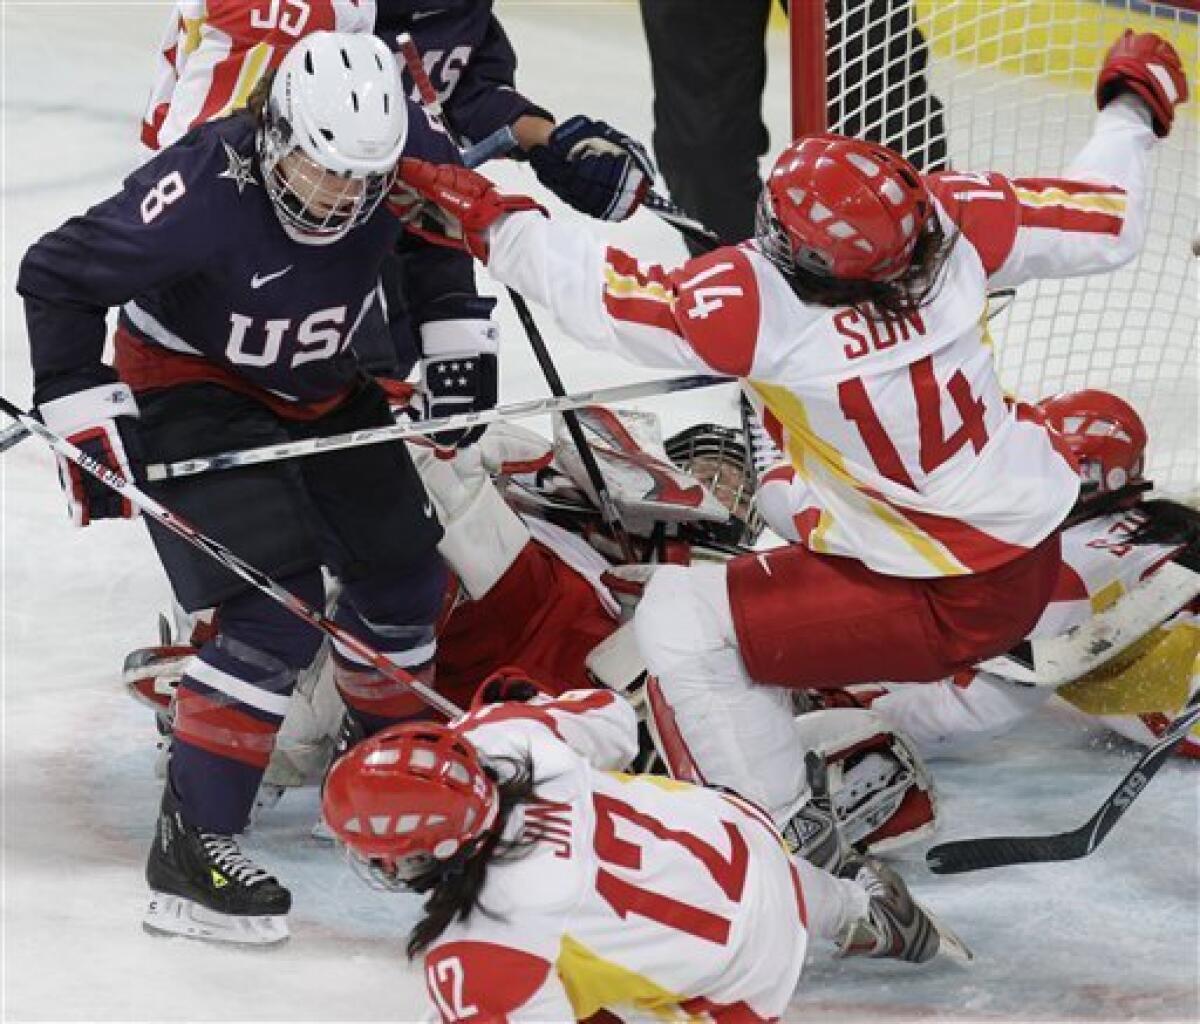 USA's defenseman Caitlin Cahow (8) tussles with China's forward Sun Rui and Jin Fengling (12) in the second period in women's preliminary round hockey play at the Vancouver 2010 Olympics in Vancouver, British Columbia, Sunday, Feb. 14, 2010. (AP Photo/Chris O'Meara)